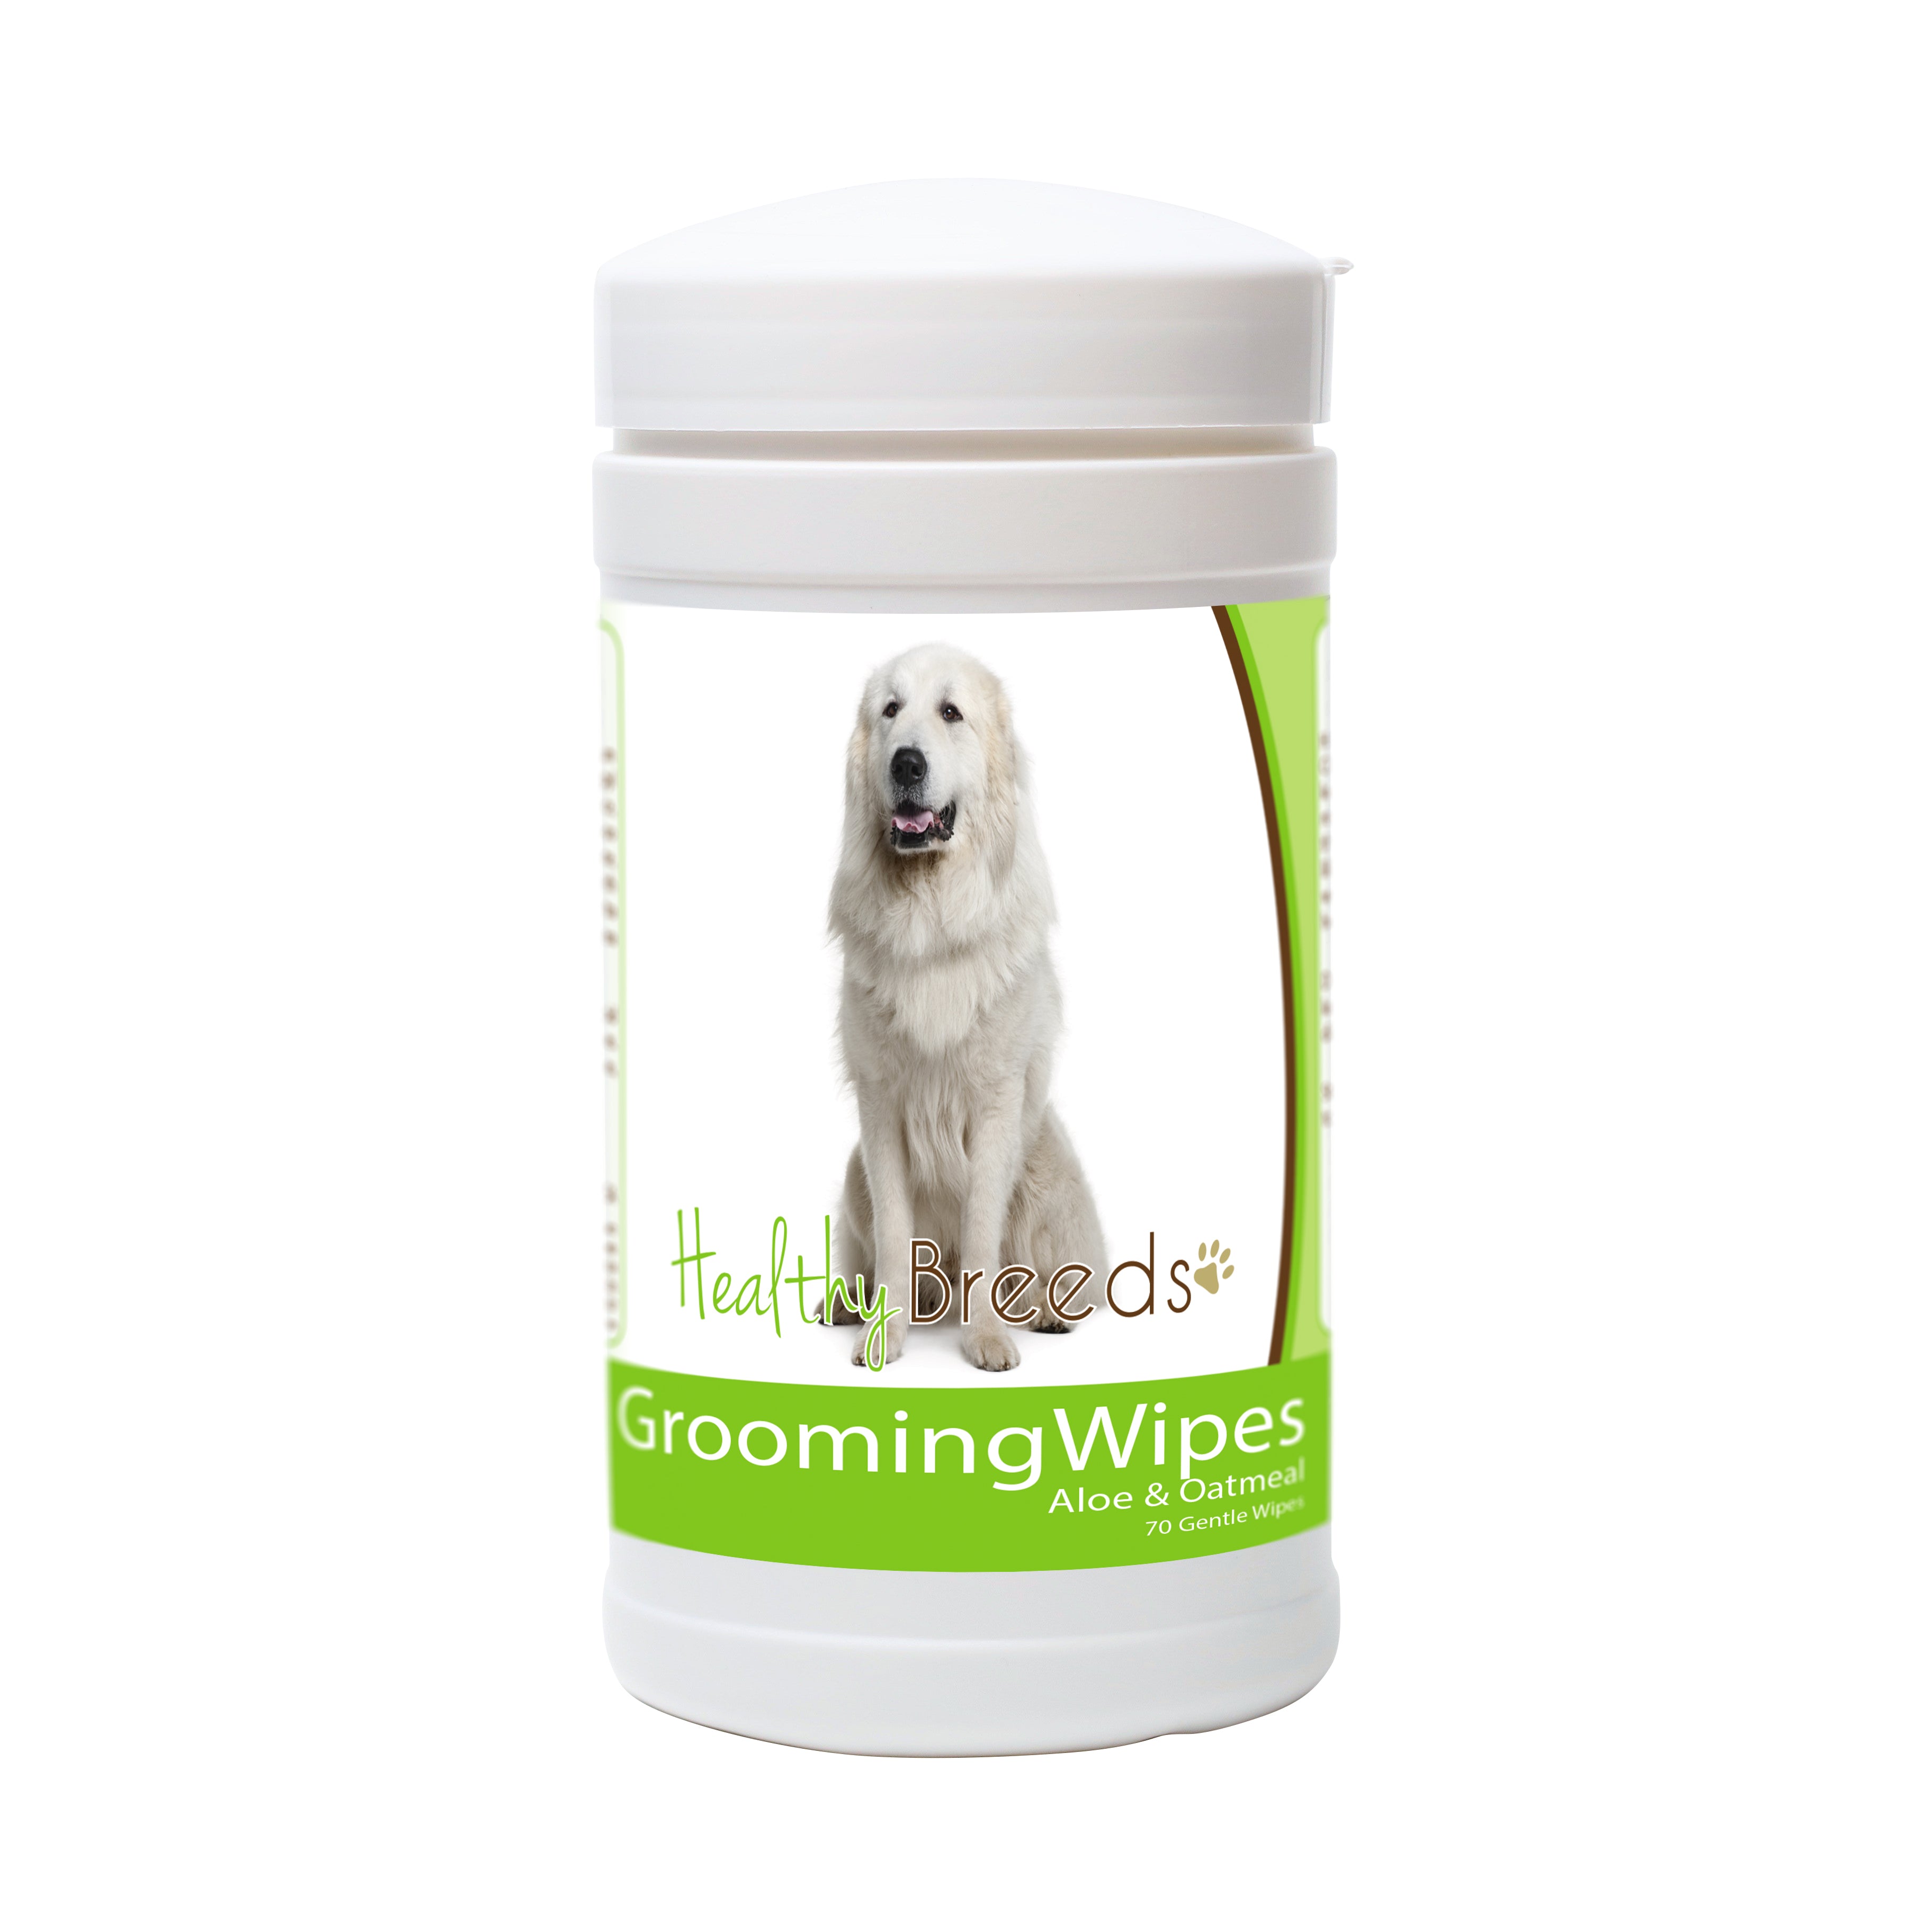 Great Pyrenees Grooming Wipes 70 Count